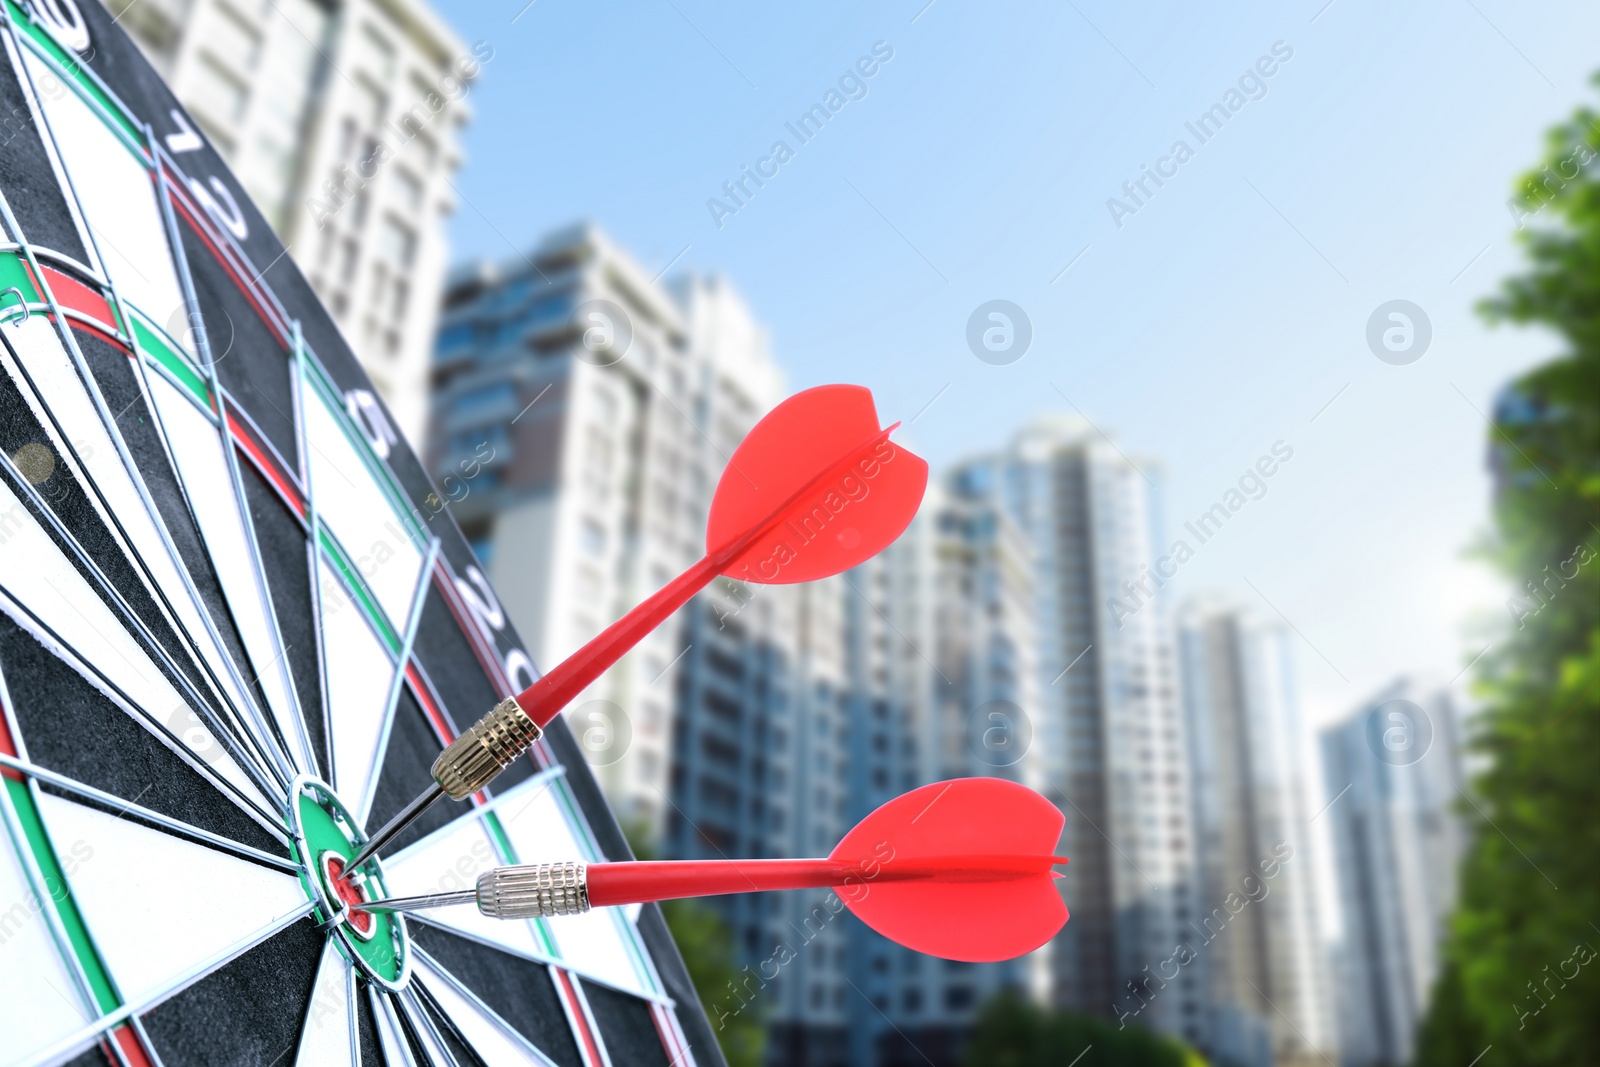 Image of Board with red darts hitting target against blurred of view cityscape